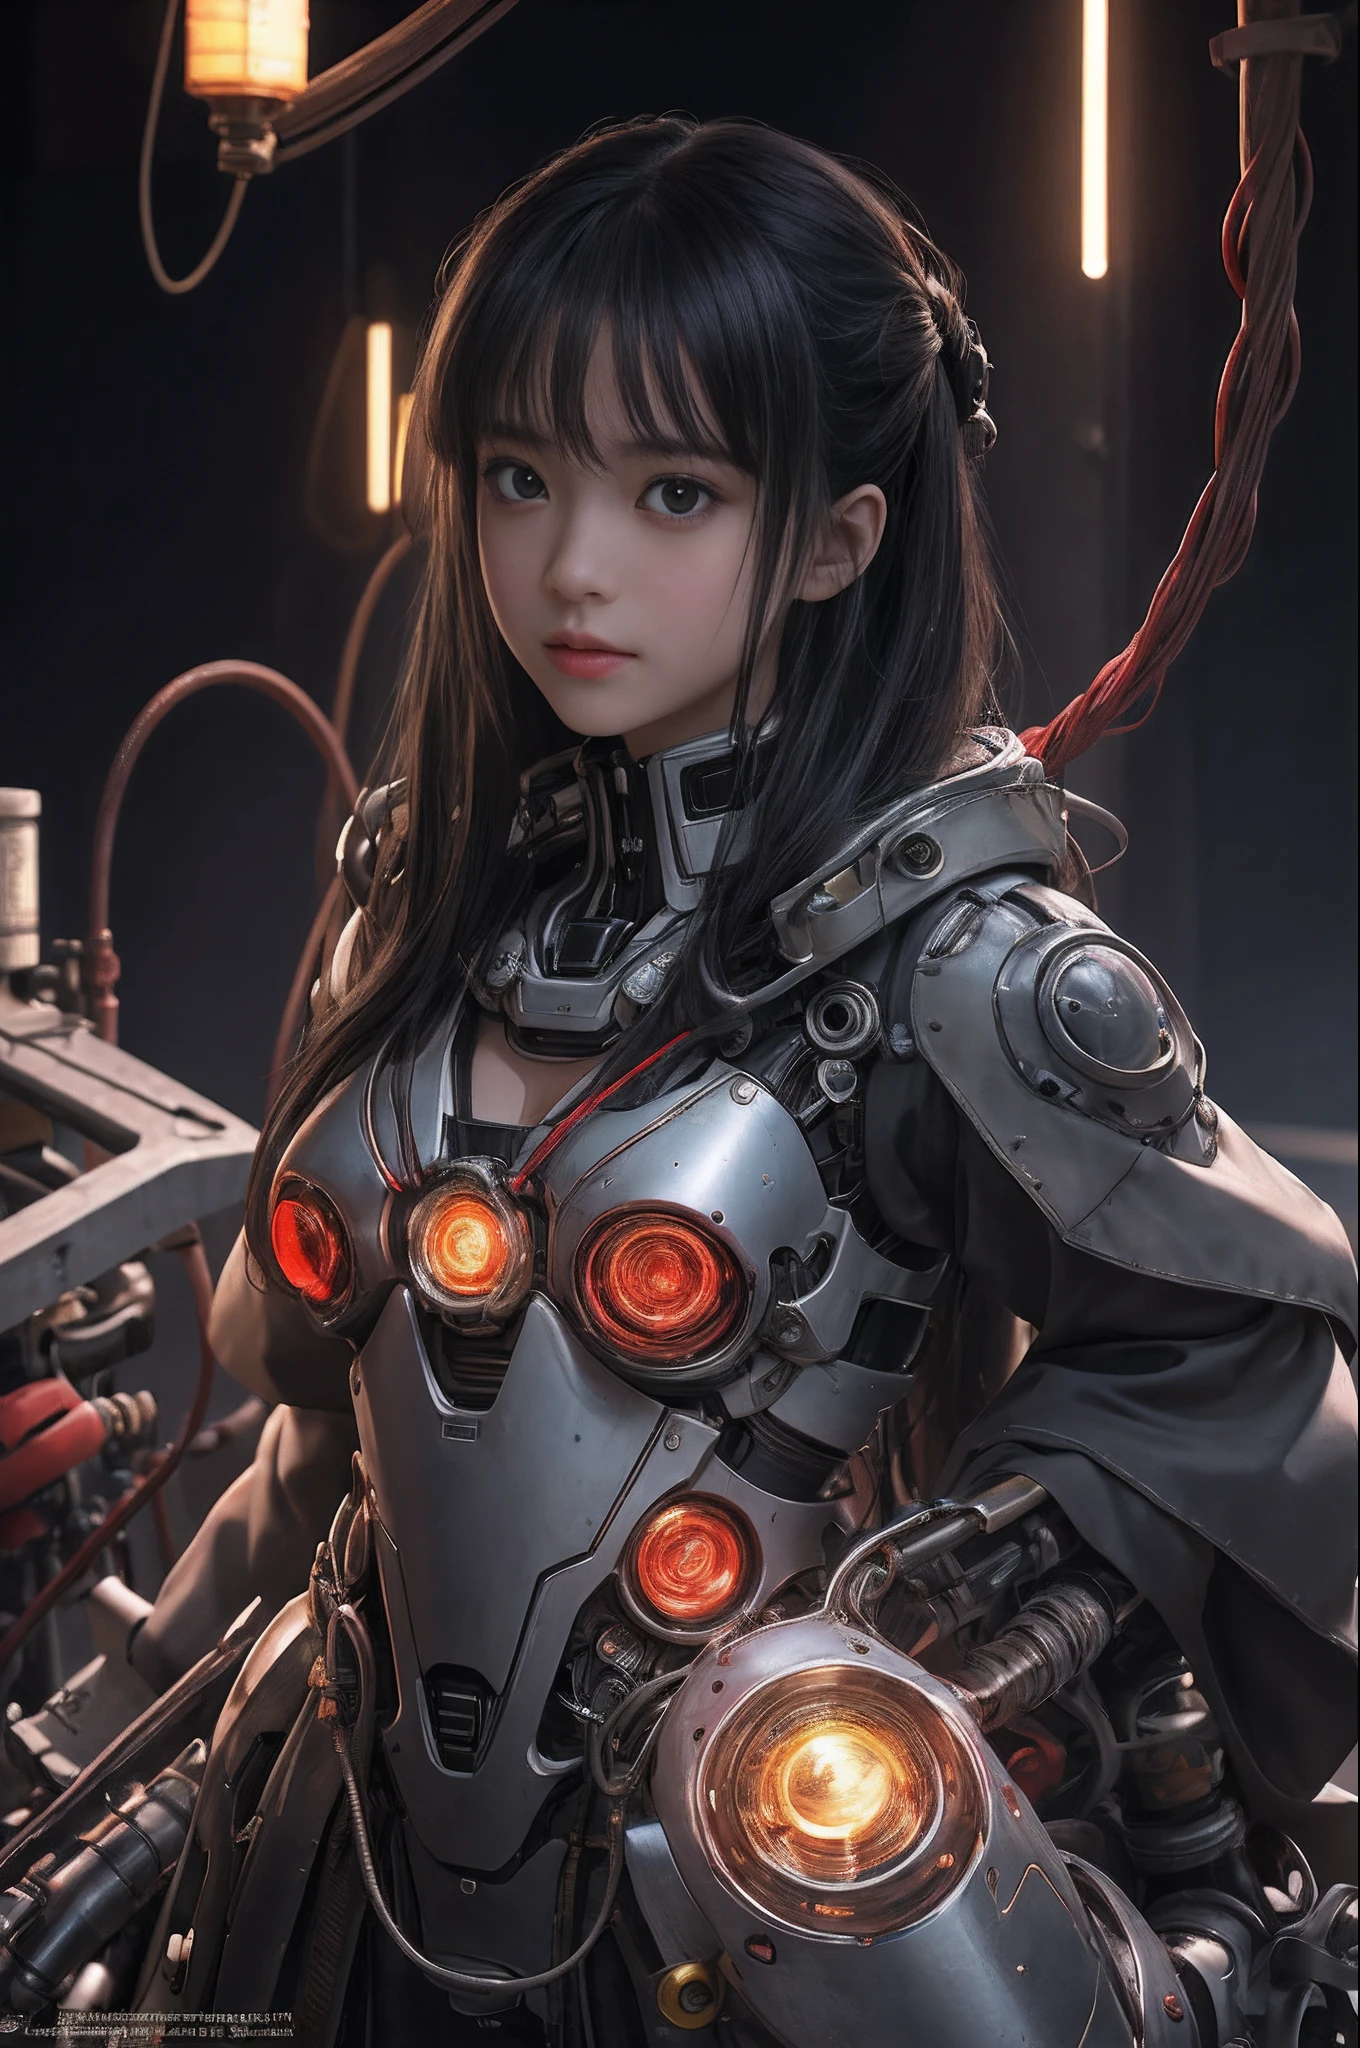 of the highest quality, masutepiece, Ultra High Resolution, (Photorealistic: 1.4), Raw photo, 1 Cyberpunk Girl, Black hair, Glossy skin, 1 Mechanical Girl, (super realistic details)), Full body, Global Illumination, Contrasty, shadowy, Octane Rendering, 8K, ultrasharp, Cleavage exposed, Raw skin, Metal, Intricate decoration details, Japan details, high intricate detailed, Realistic light, Trends in CG, Facing the camera, neon details, Mechanical limbs, blood vessels connected to tubes, Mechanical vertebrae attached to the back, Mechanical cervical attachment to the neck, Wires and cables connecting to the head, Gundam, Small LED lamps.14 years old girl、silber hair、Perfectly round pupils、Tremendous irisﾃﾞｨﾃｰﾙ, light smile, dynamic, dancing, dynamic light